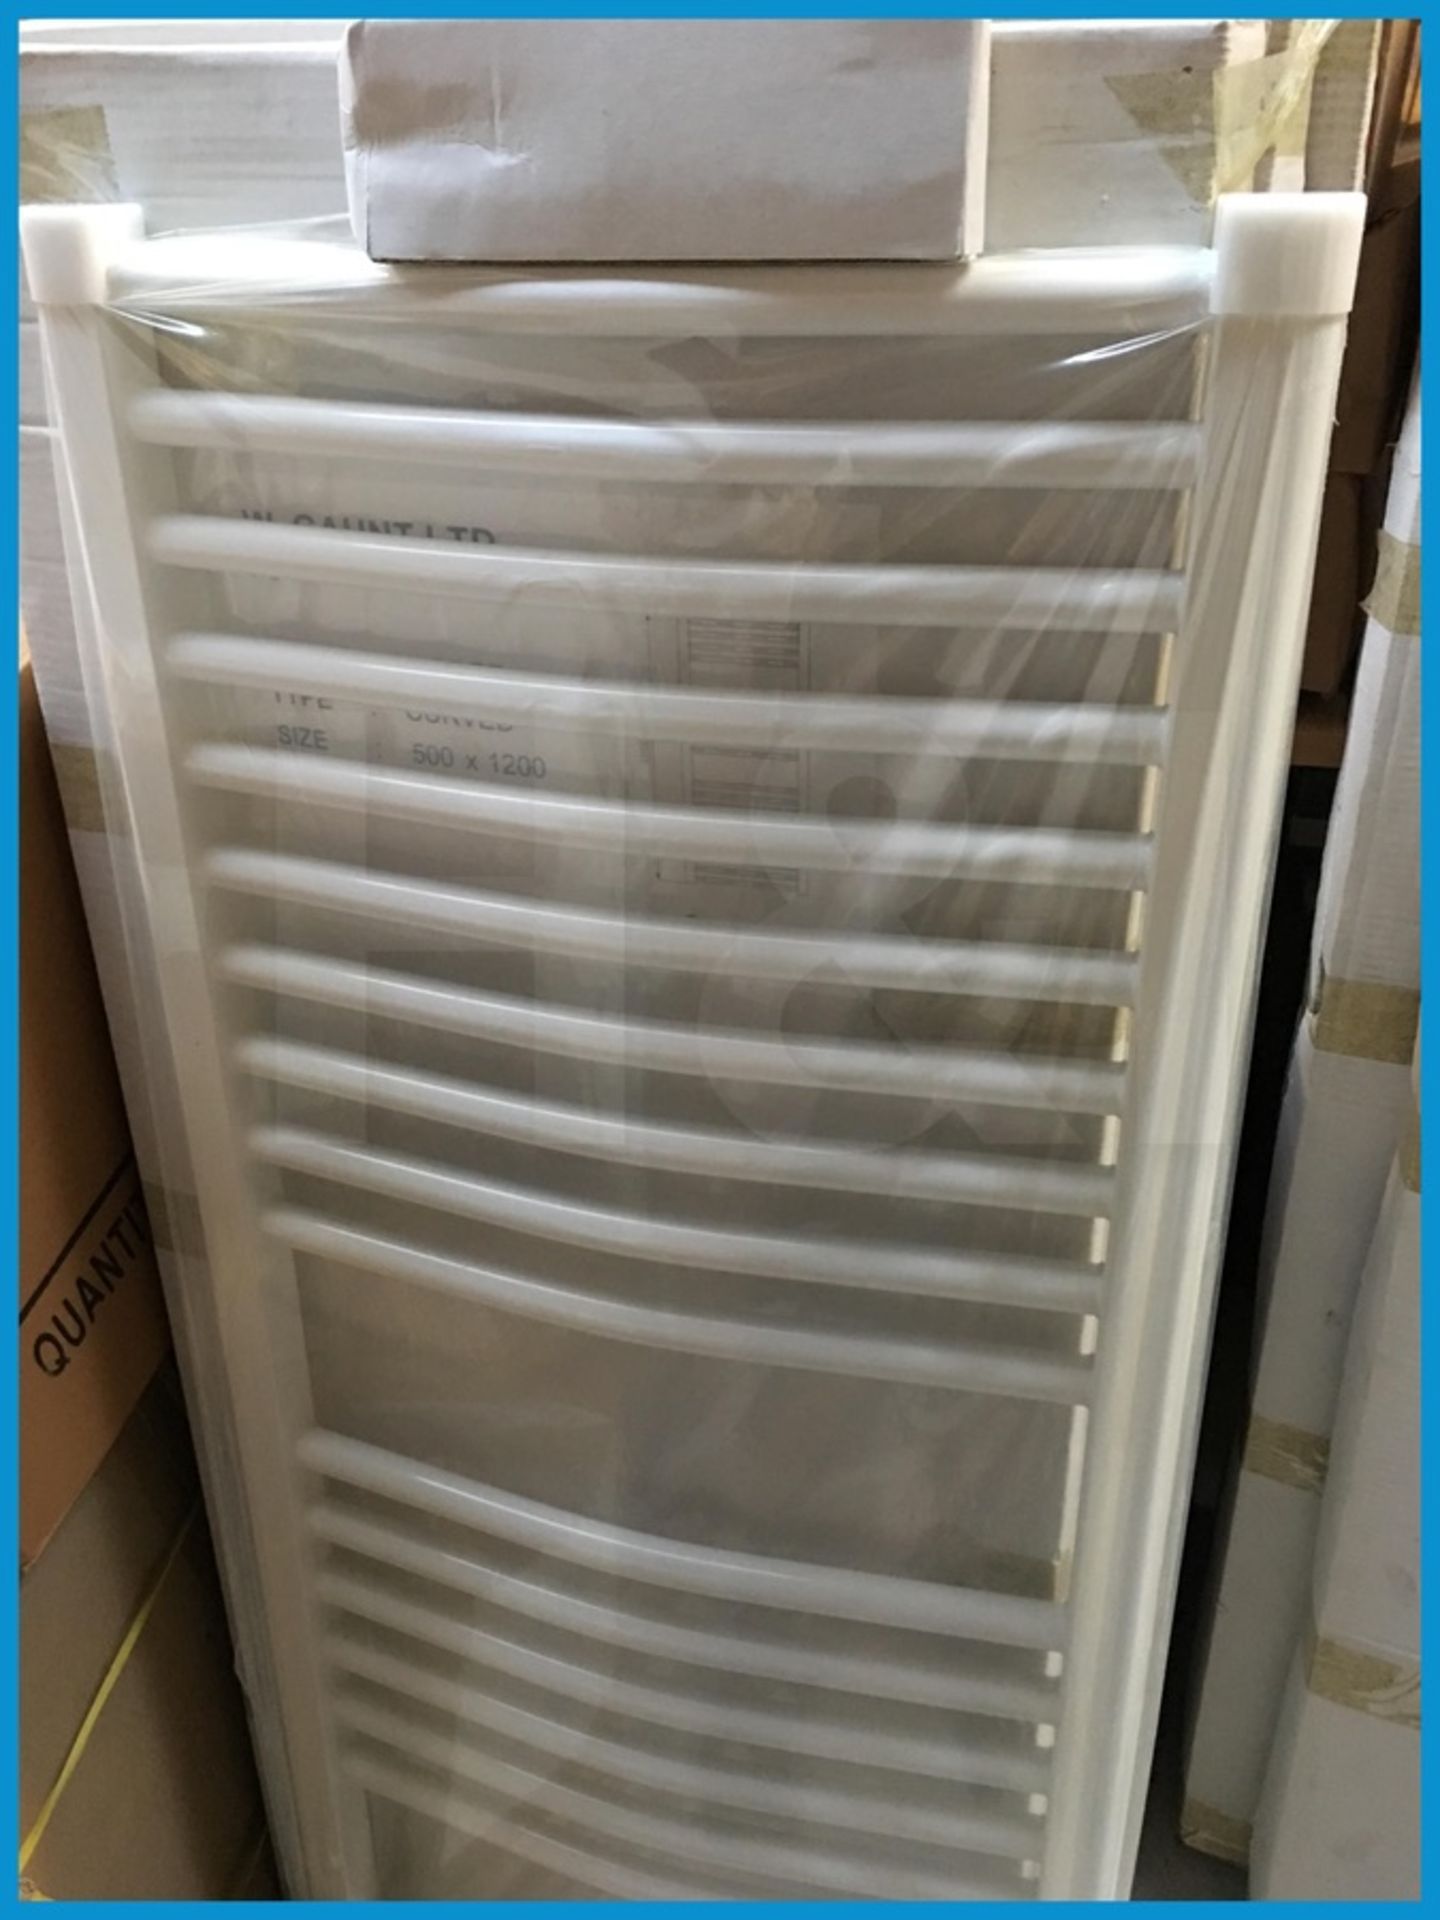 Designer curved ladder towel warmer 1200x600. New and boxed. Suggested manufacturers selling price £